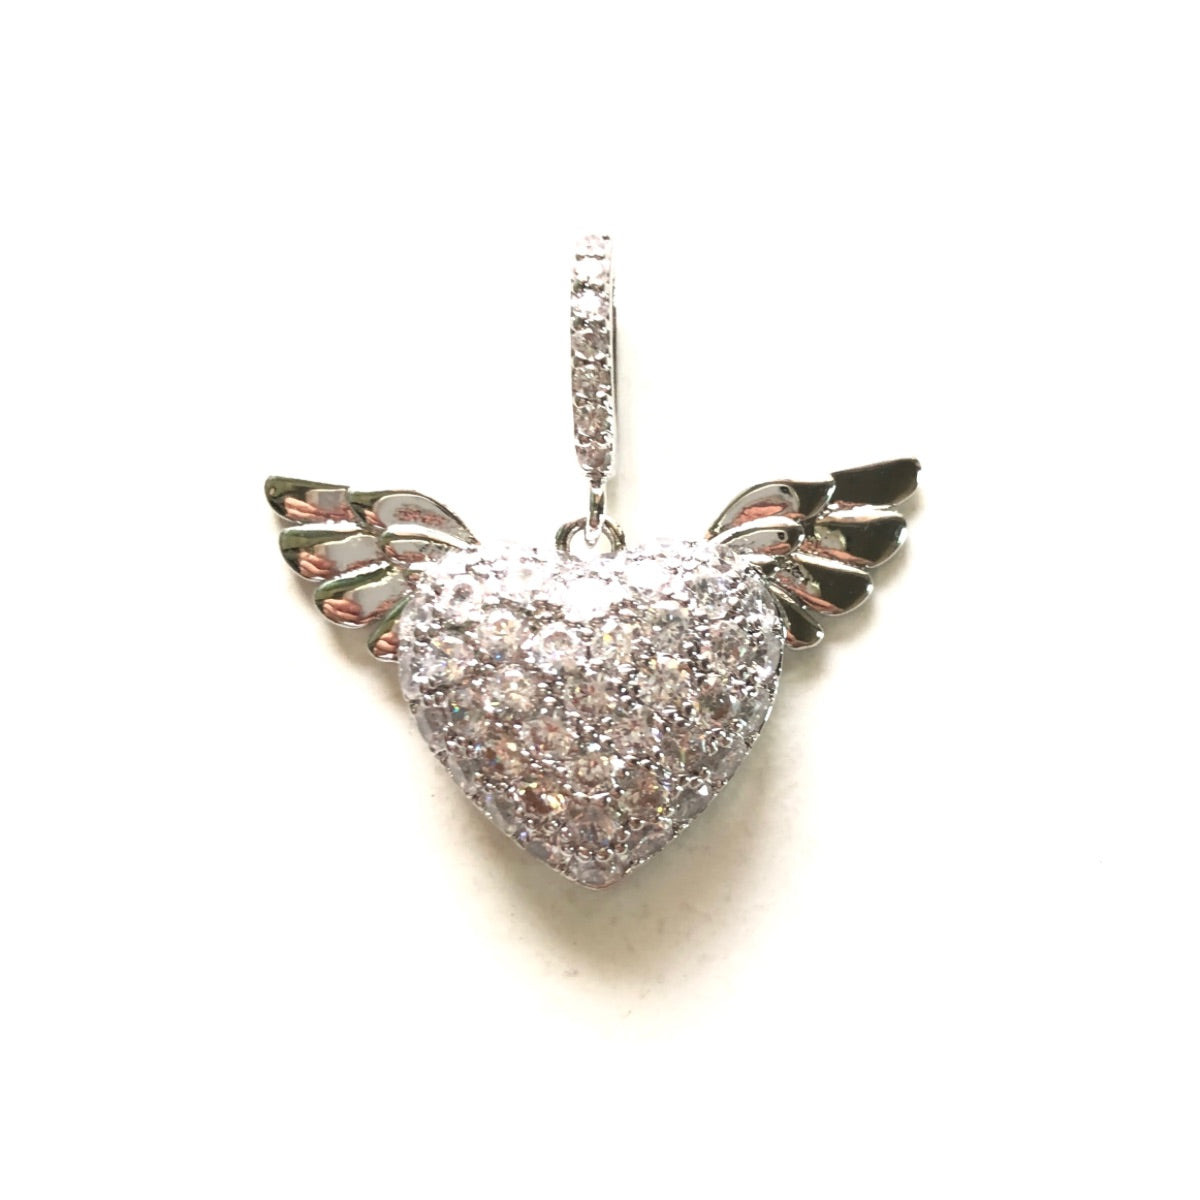 10pcs/lot 29.2*18.6mm CZ Paved Angel Wing 3D Heart Charms CZ Paved Charms Hearts New Charms Arrivals Charms Beads Beyond